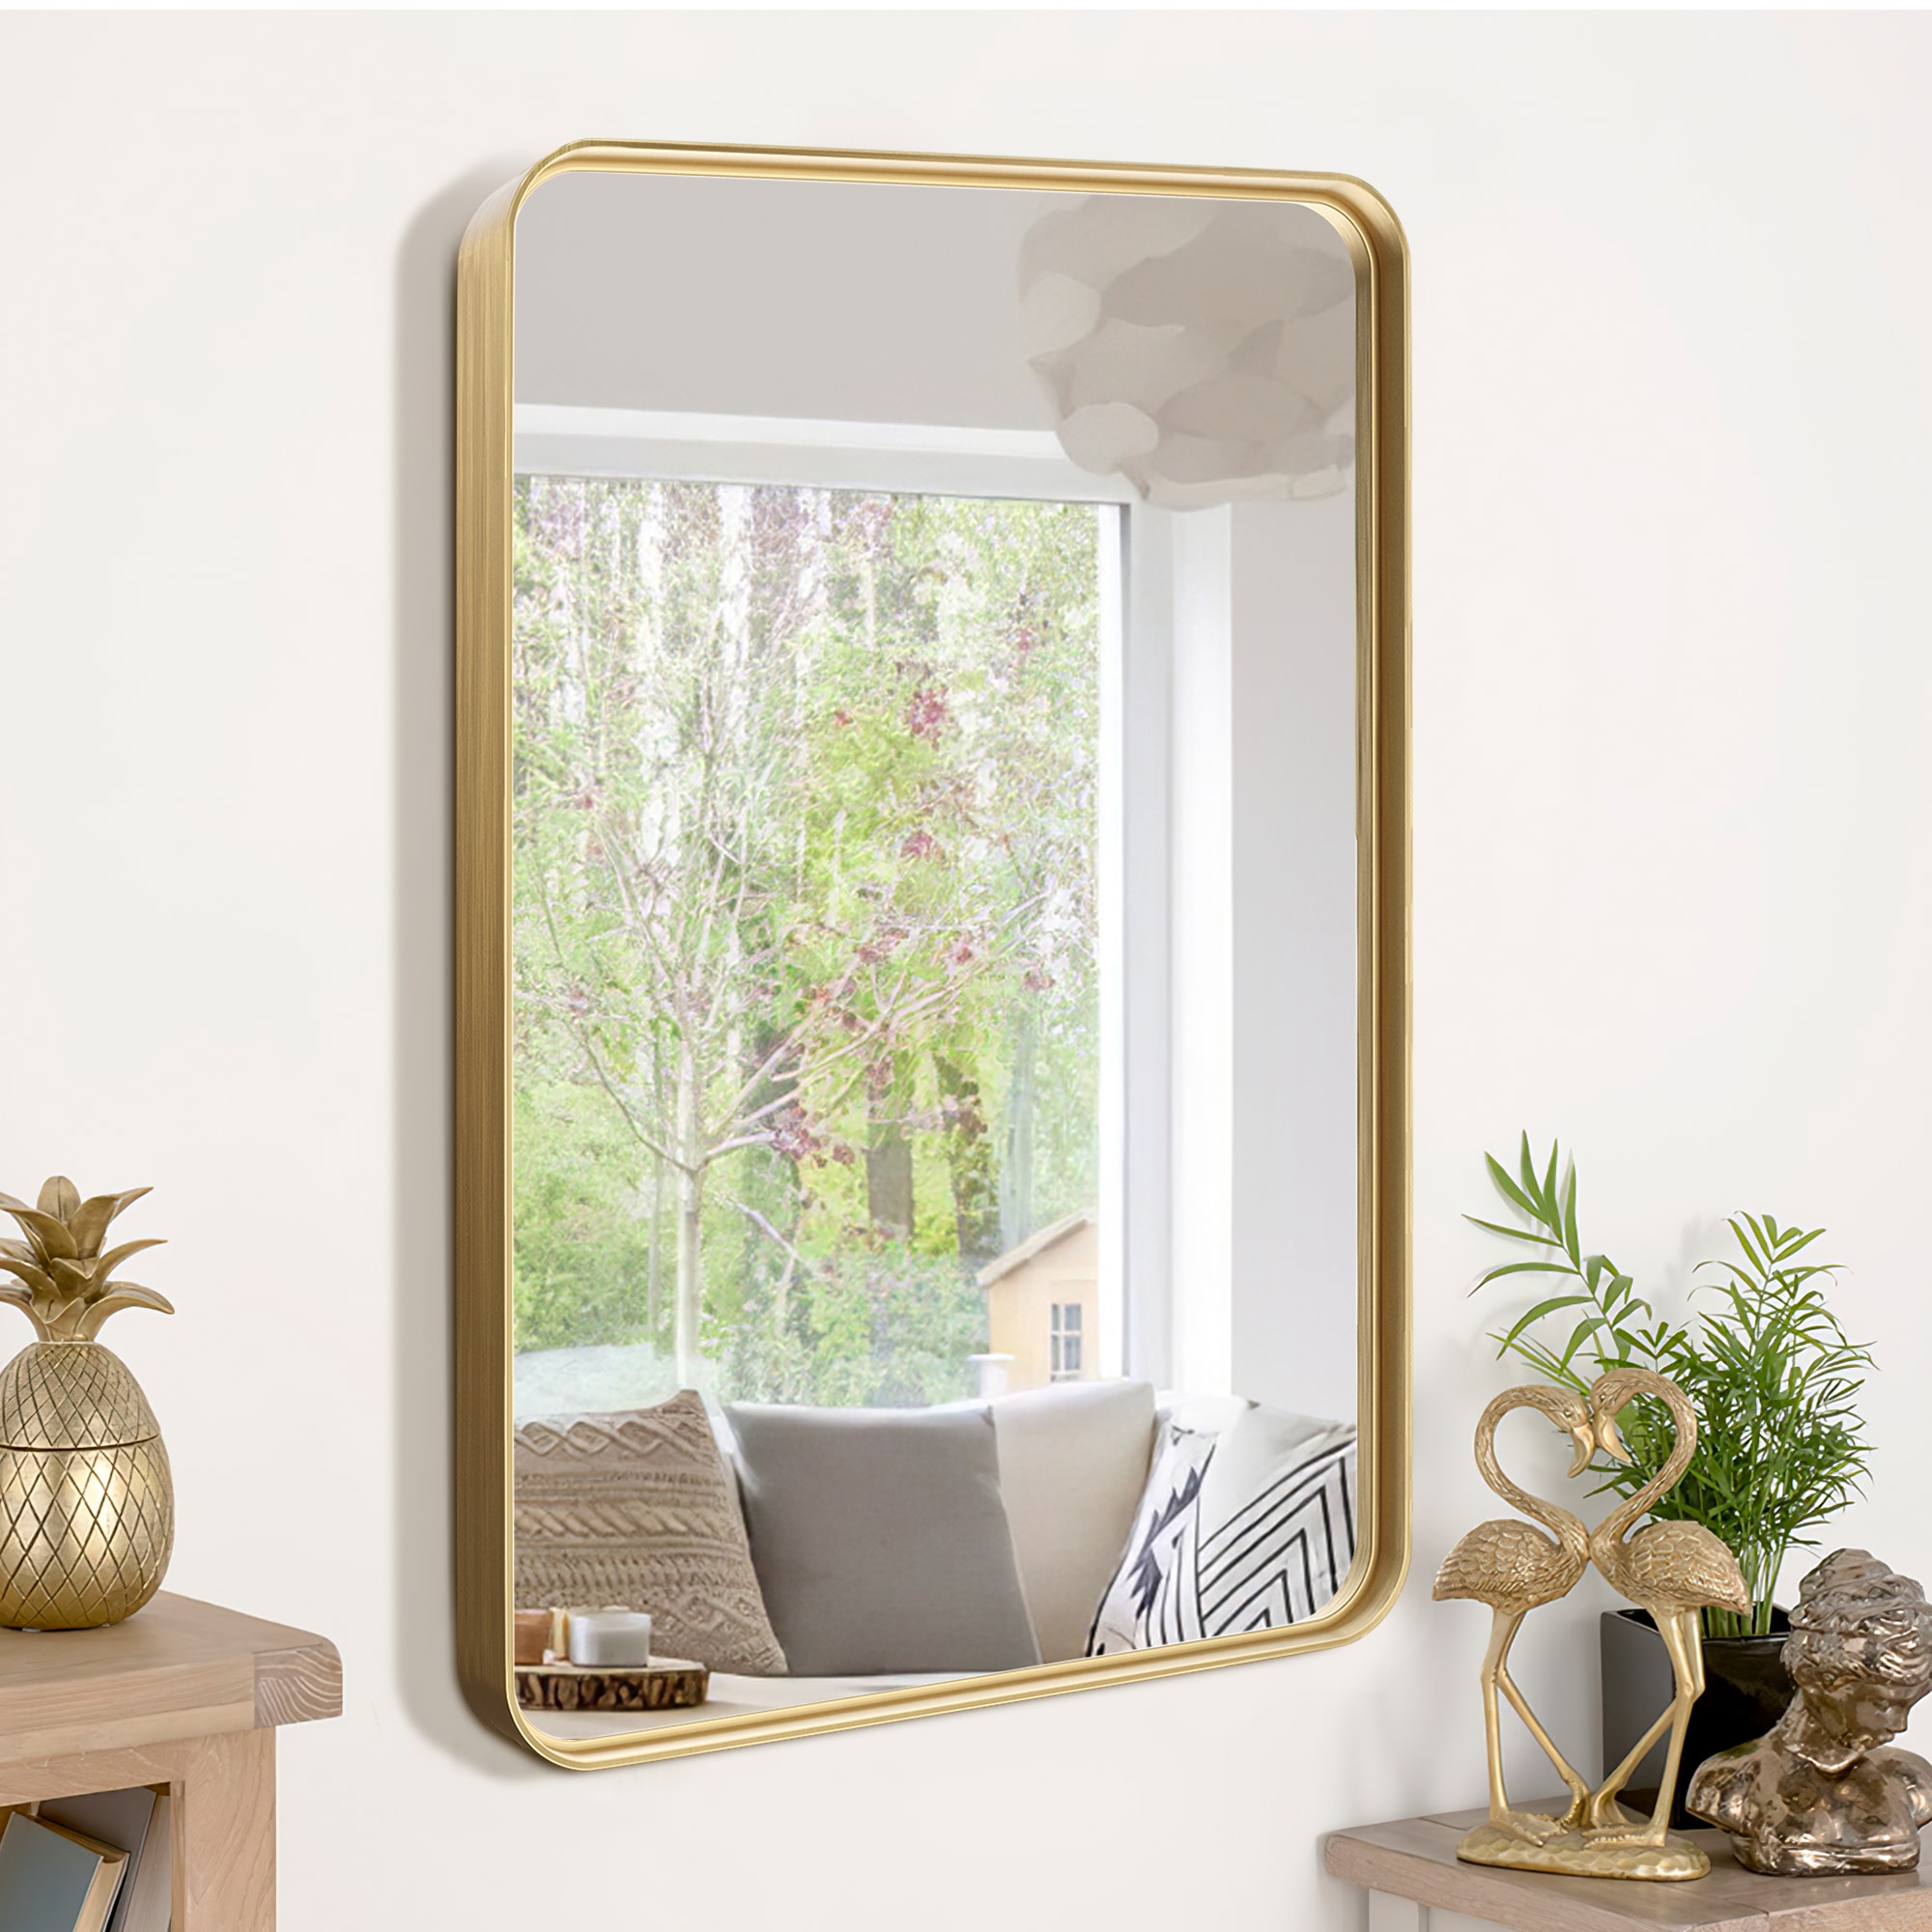 NeuType 28 inch Round Mirror Circle Mirrors , Gold , Wall Mounted Deep Set  Aluminum Alloy Frame for Bathroom, Living Room, Bedroom